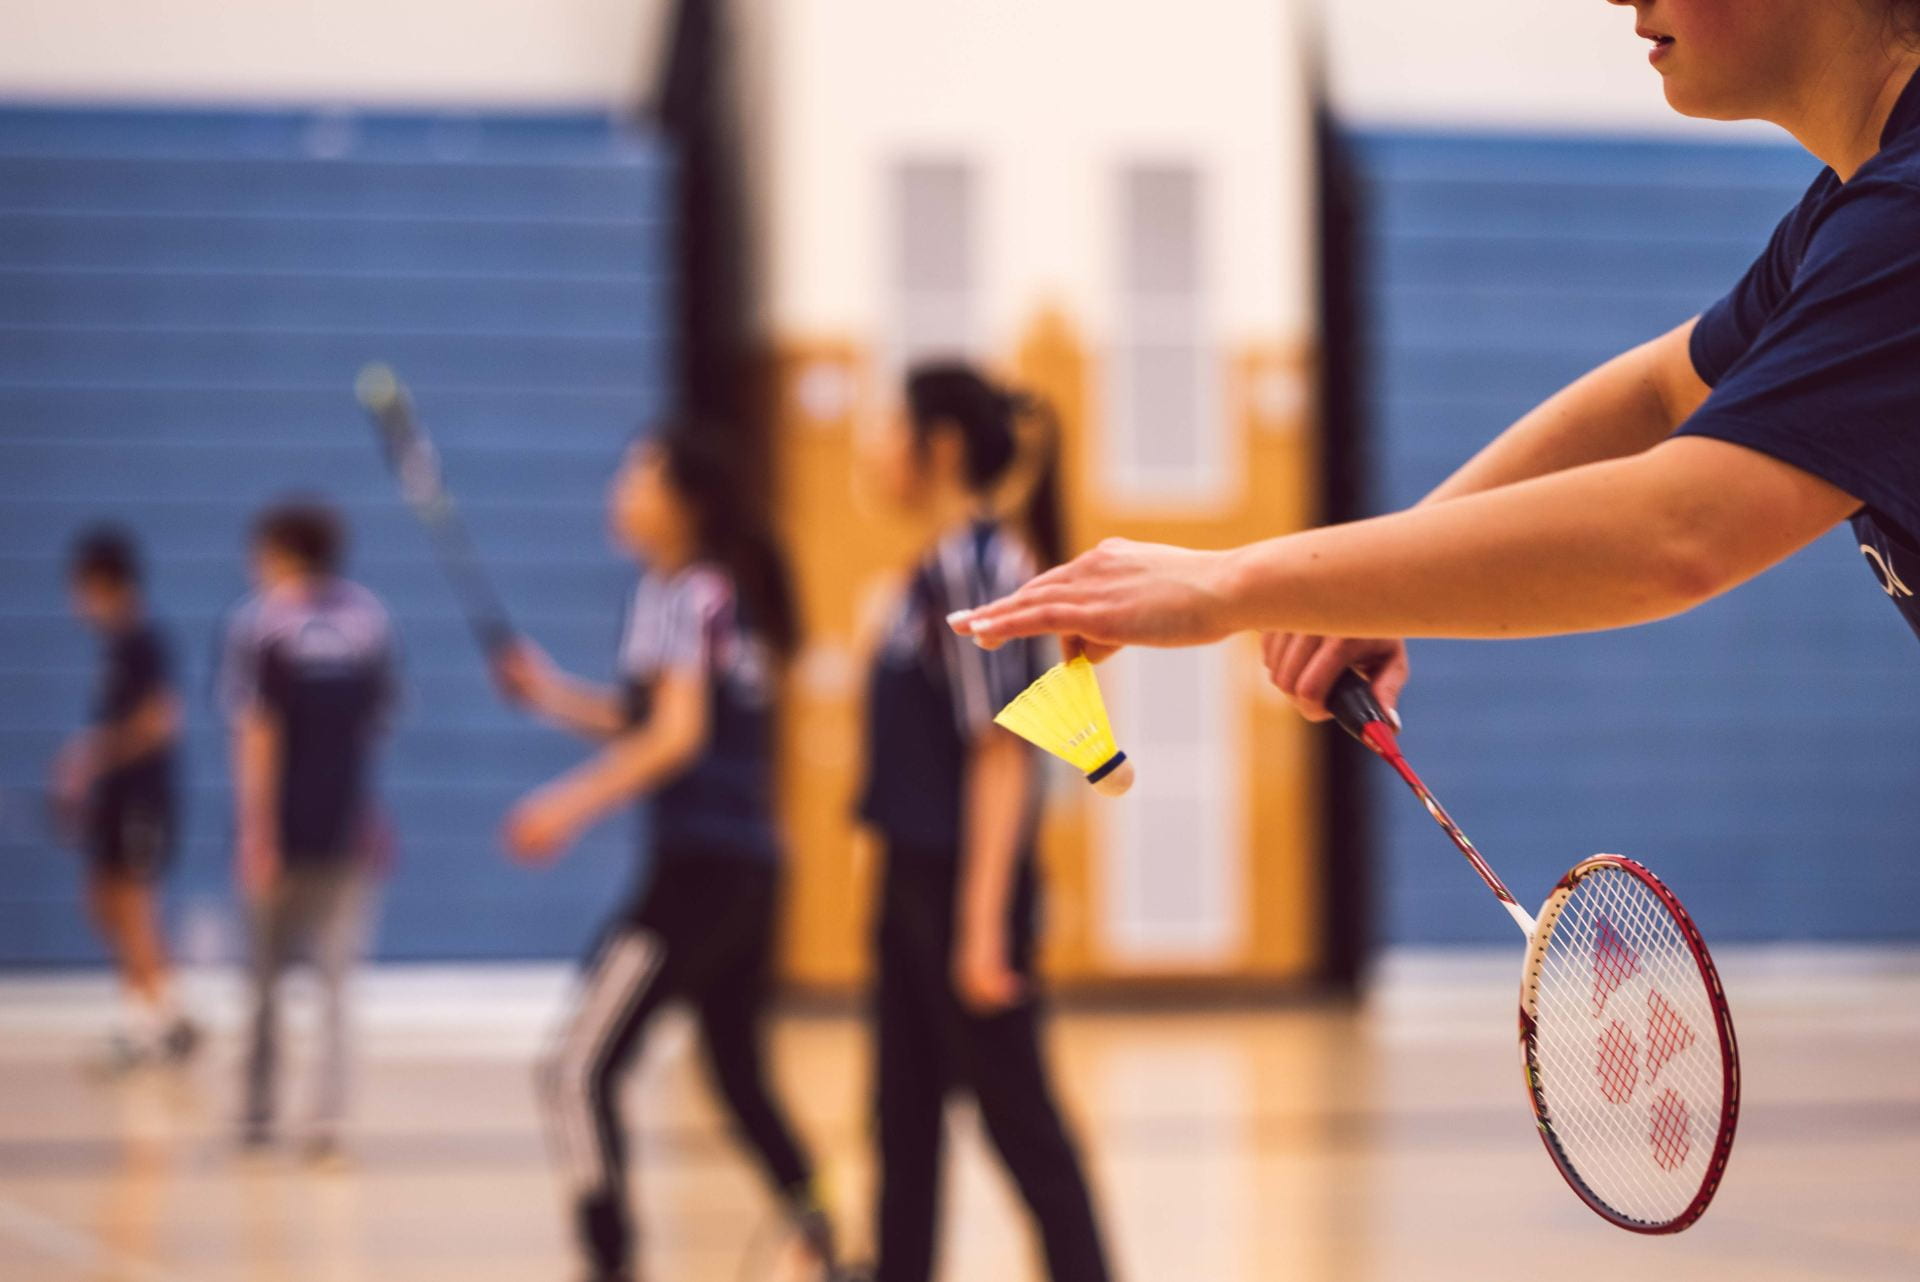 A person getting ready to serve a shuttlecock in badminton.